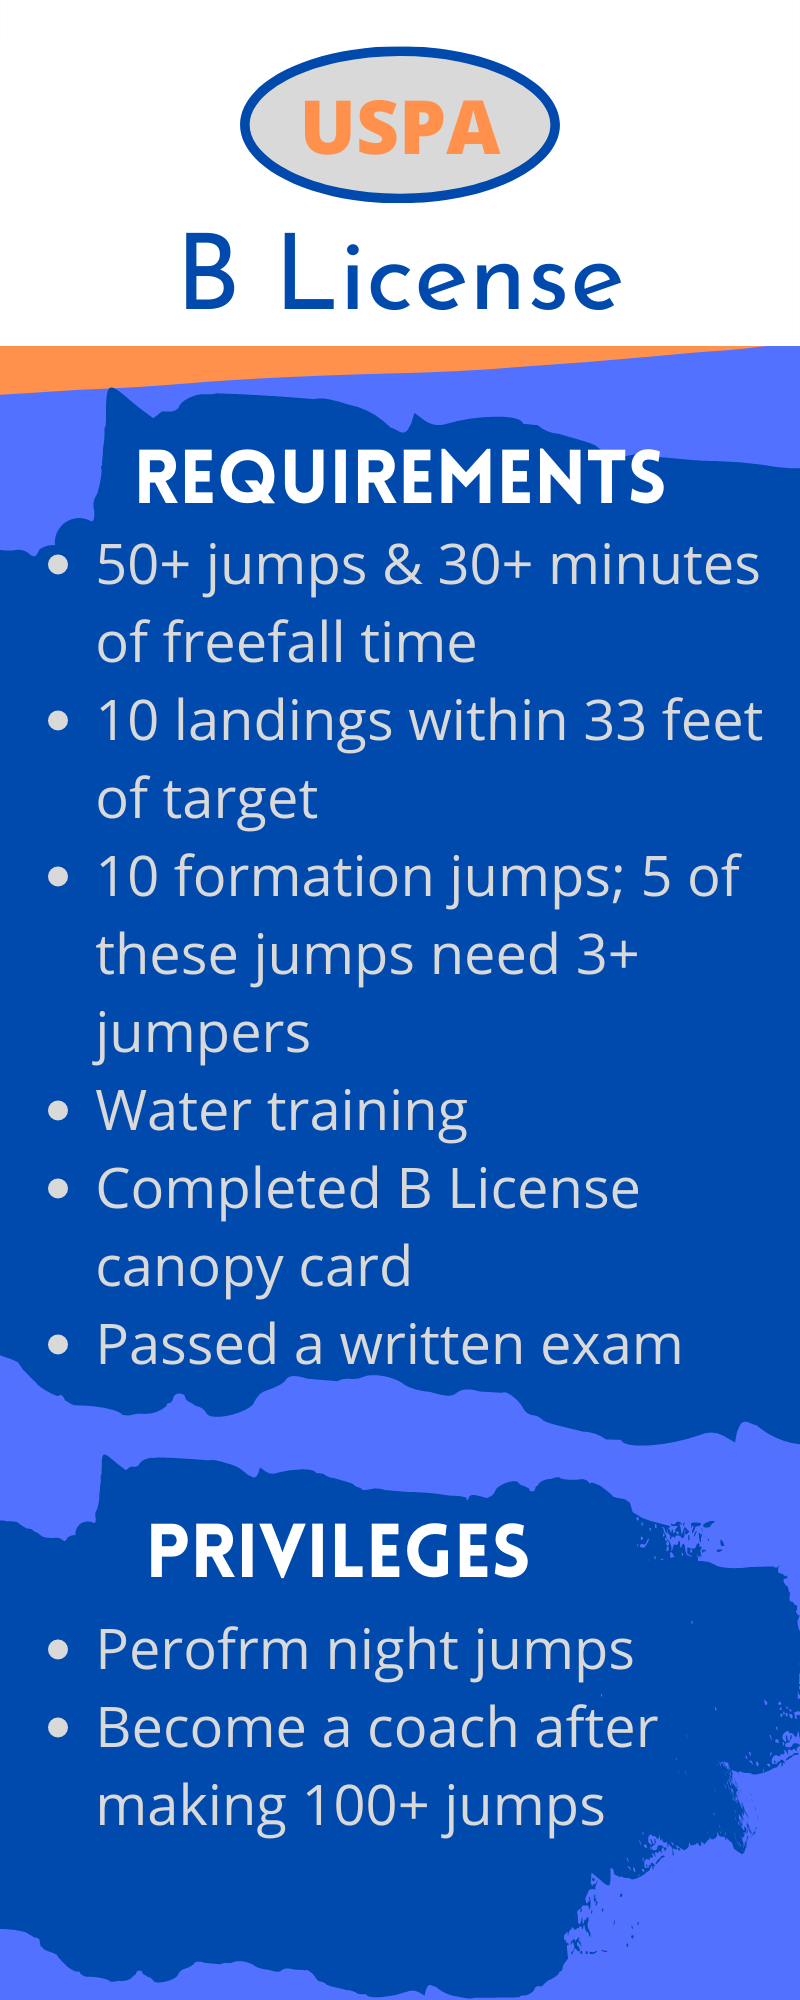 USPA B License Requirements and Privileges